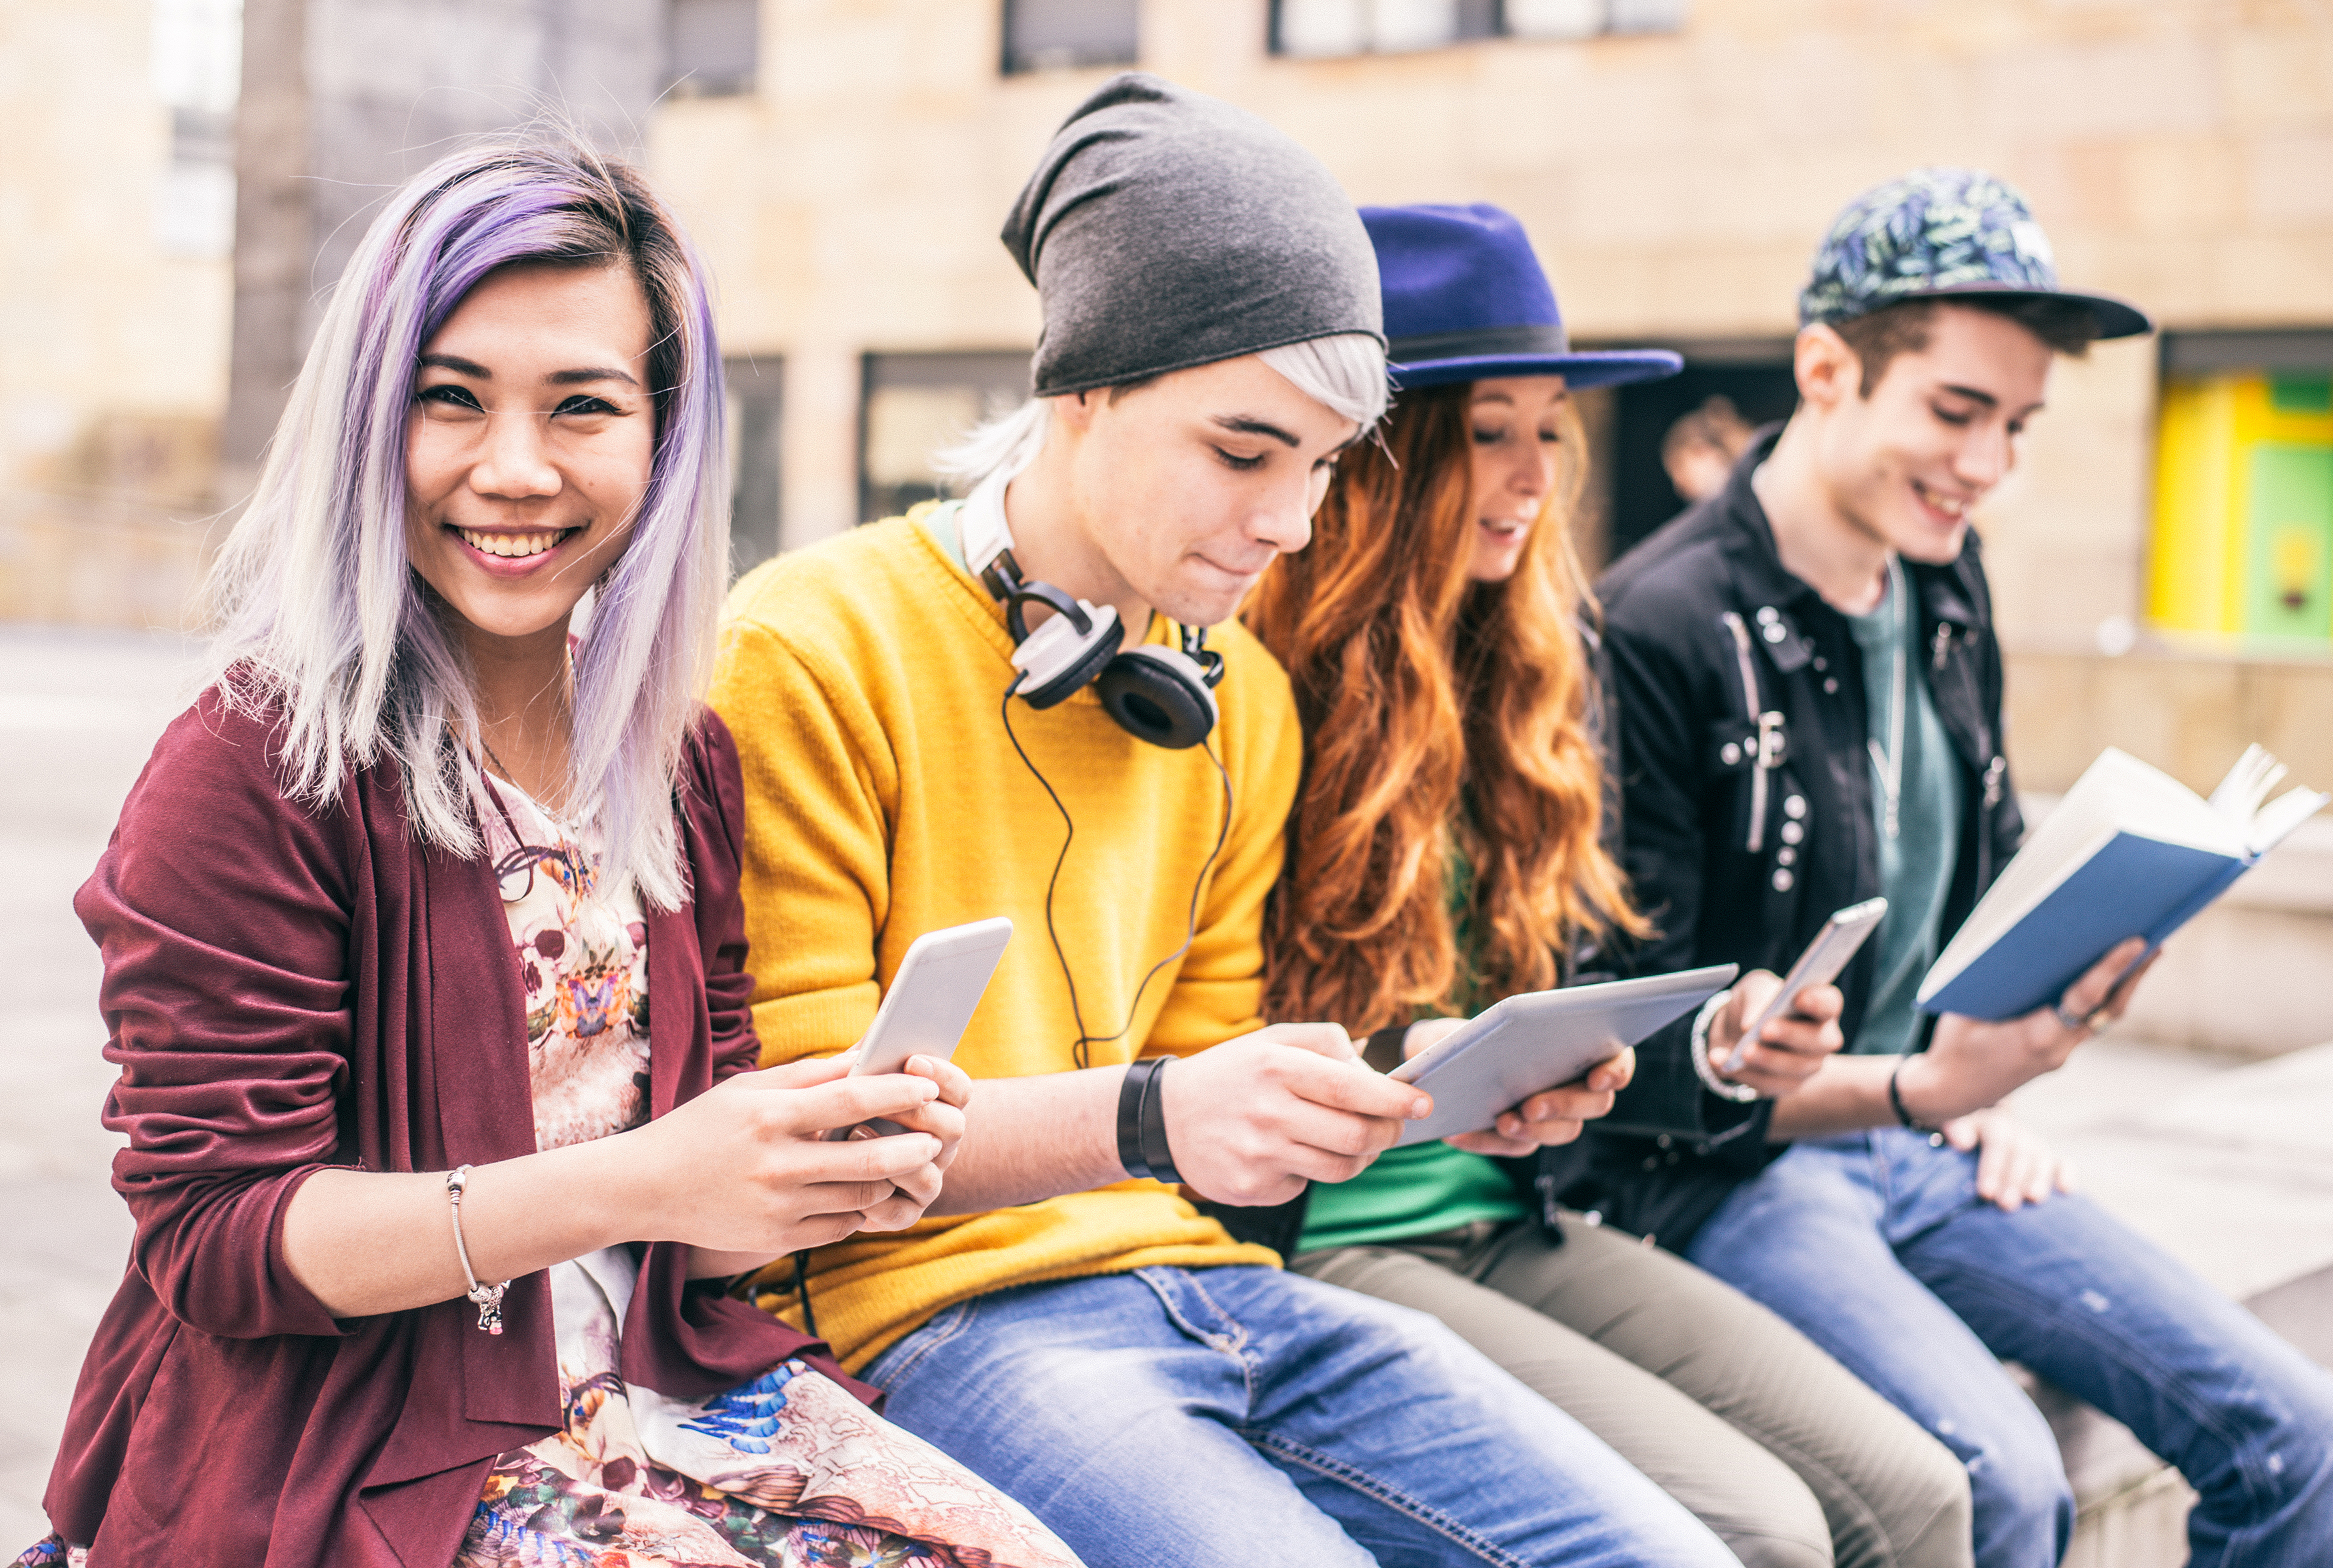 Four teens sitting on a wall, looking at books/mobile devices